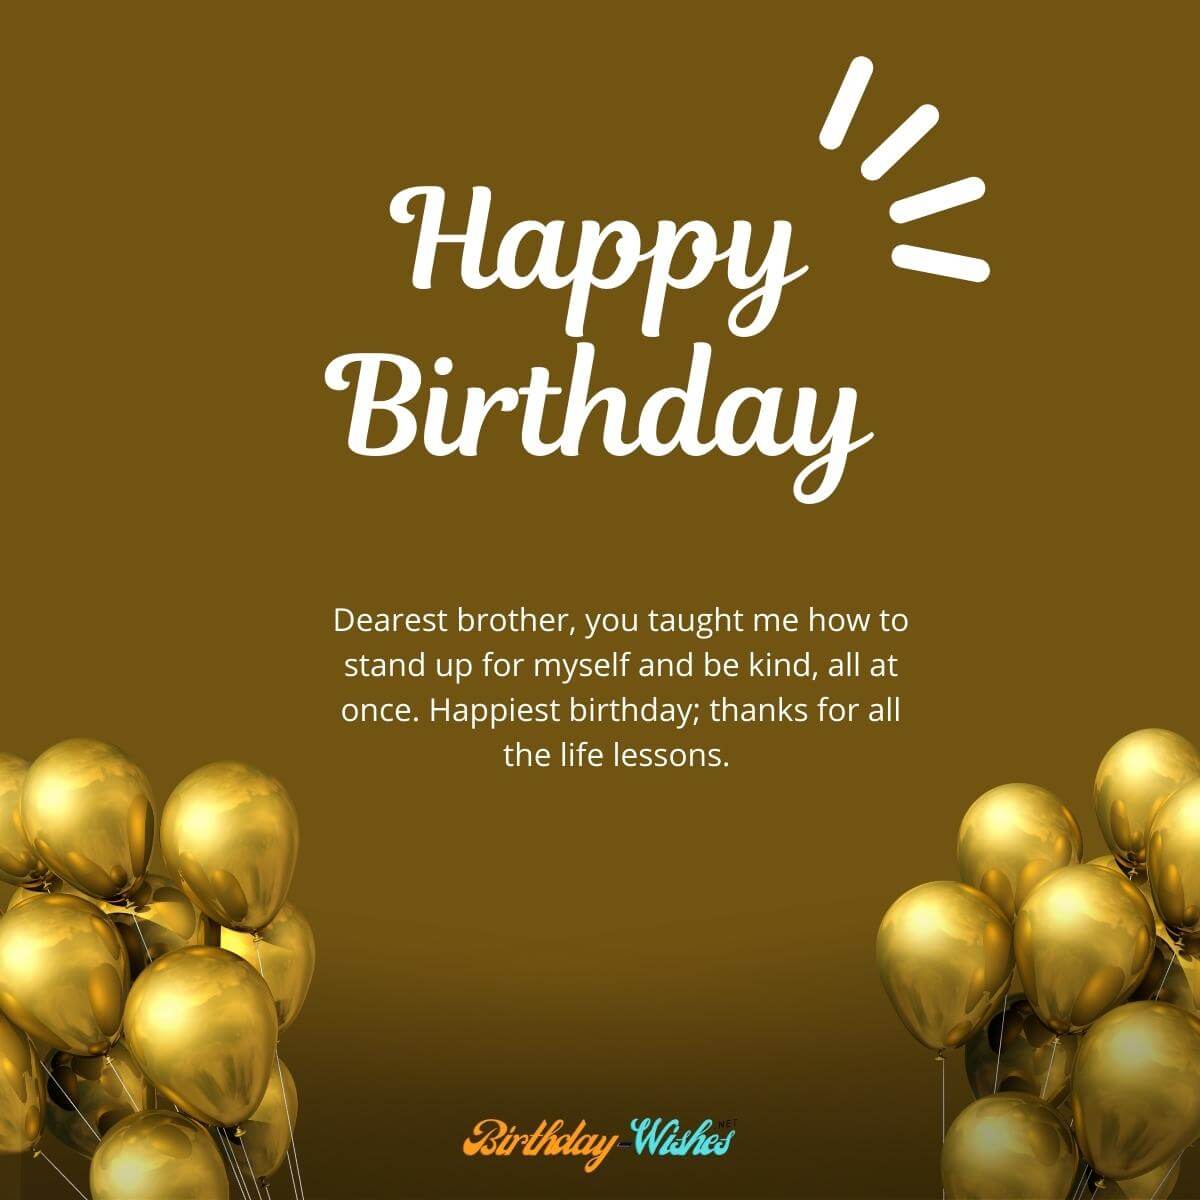 100+ Special Birthday Wishes for Brother - Birthday-Wishes.net